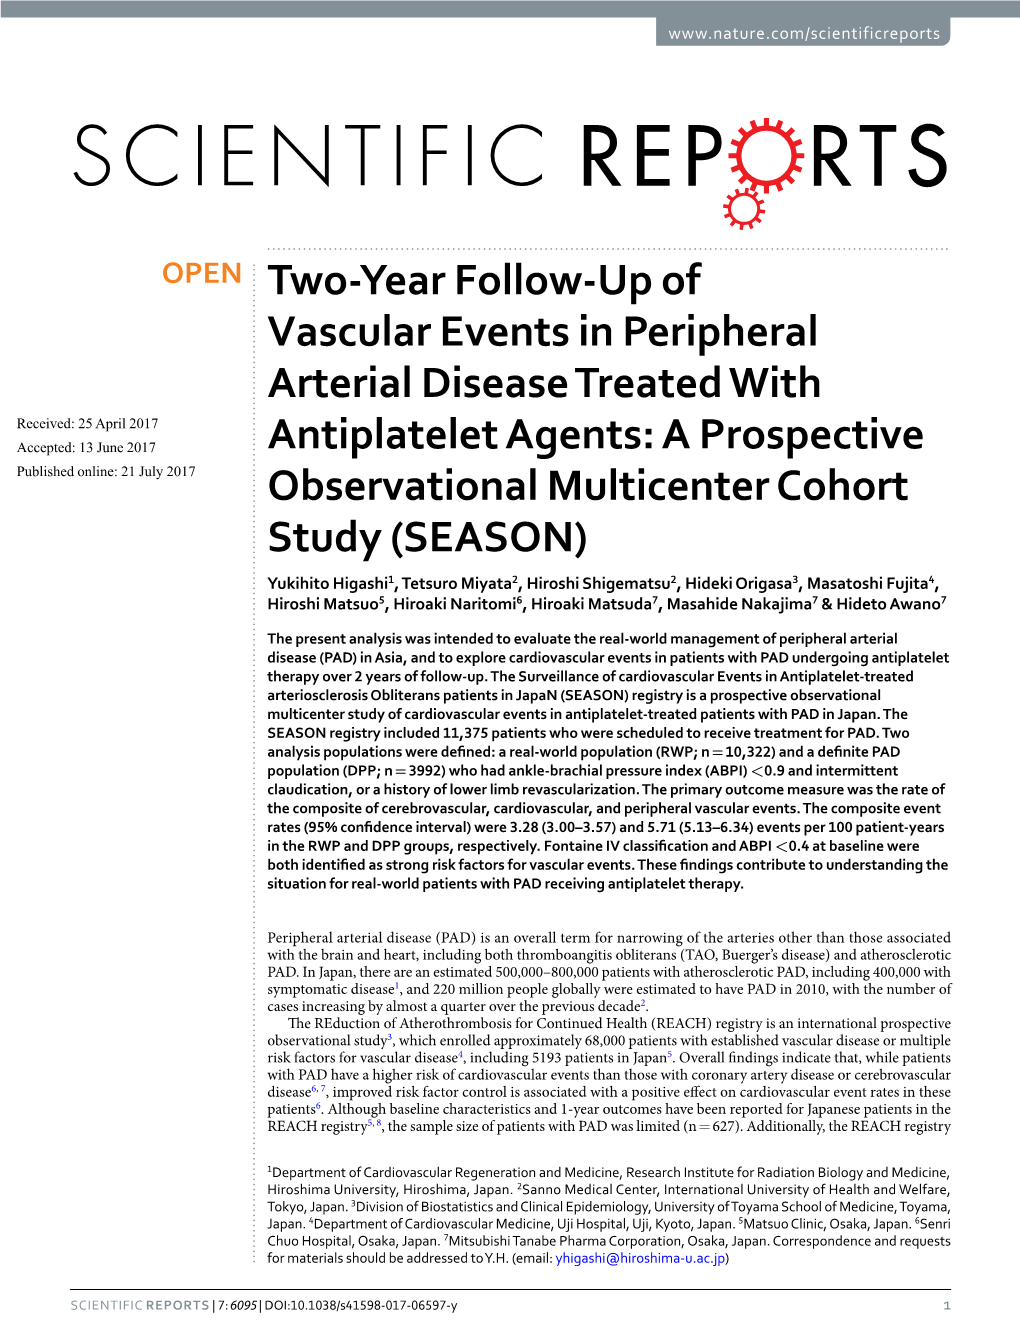 Two-Year Follow-Up of Vascular Events in Peripheral Arterial